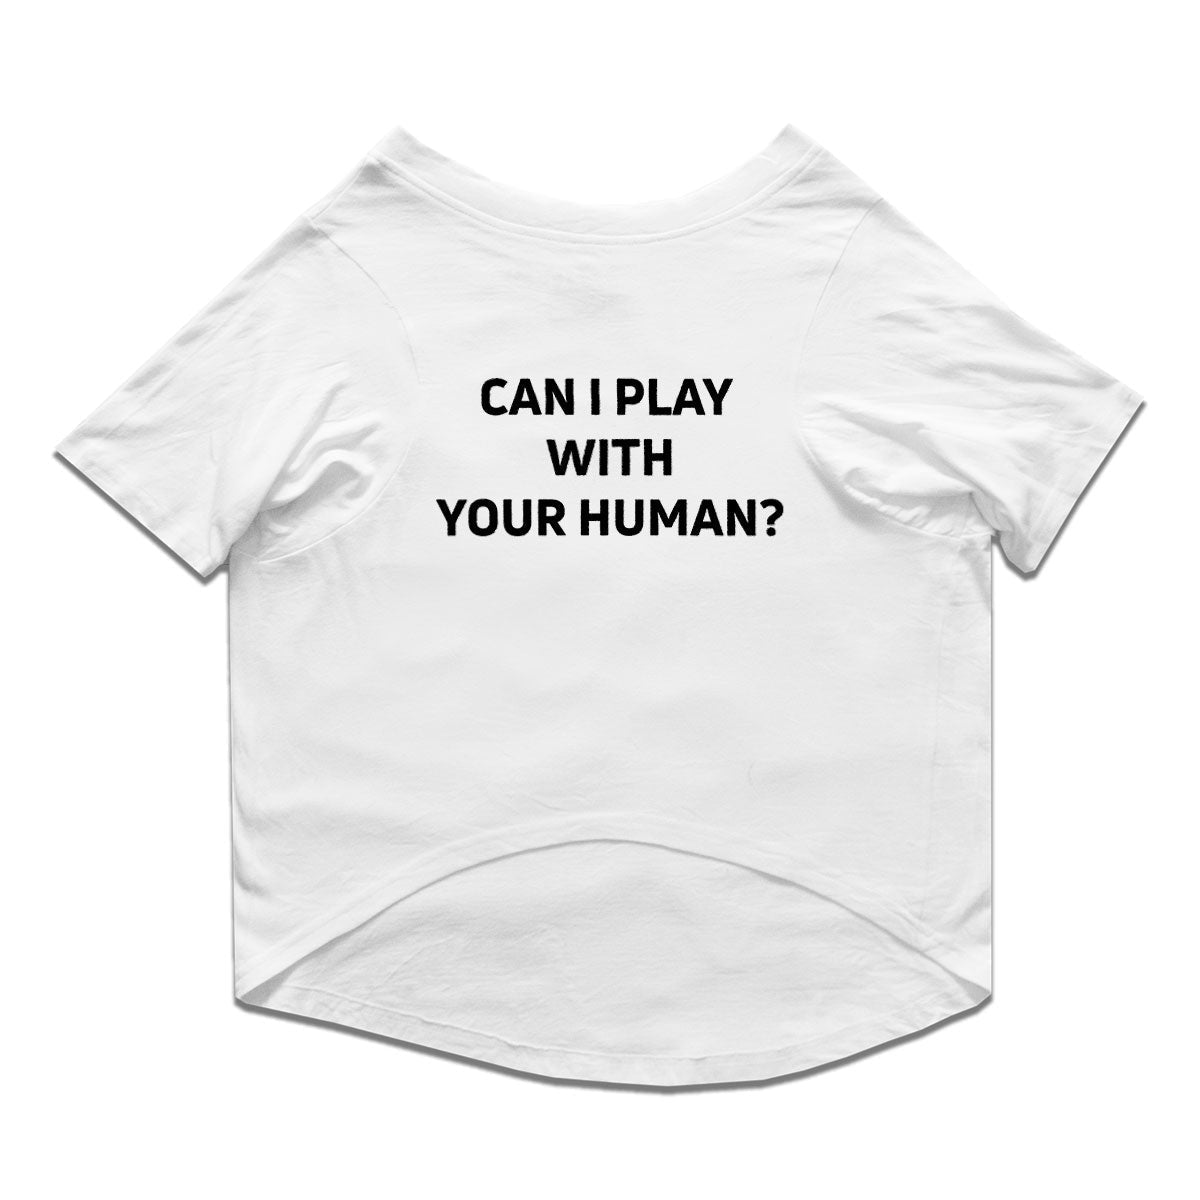 Ruse / can-i-play-with-your-human-crew-neck-dog-tee / White